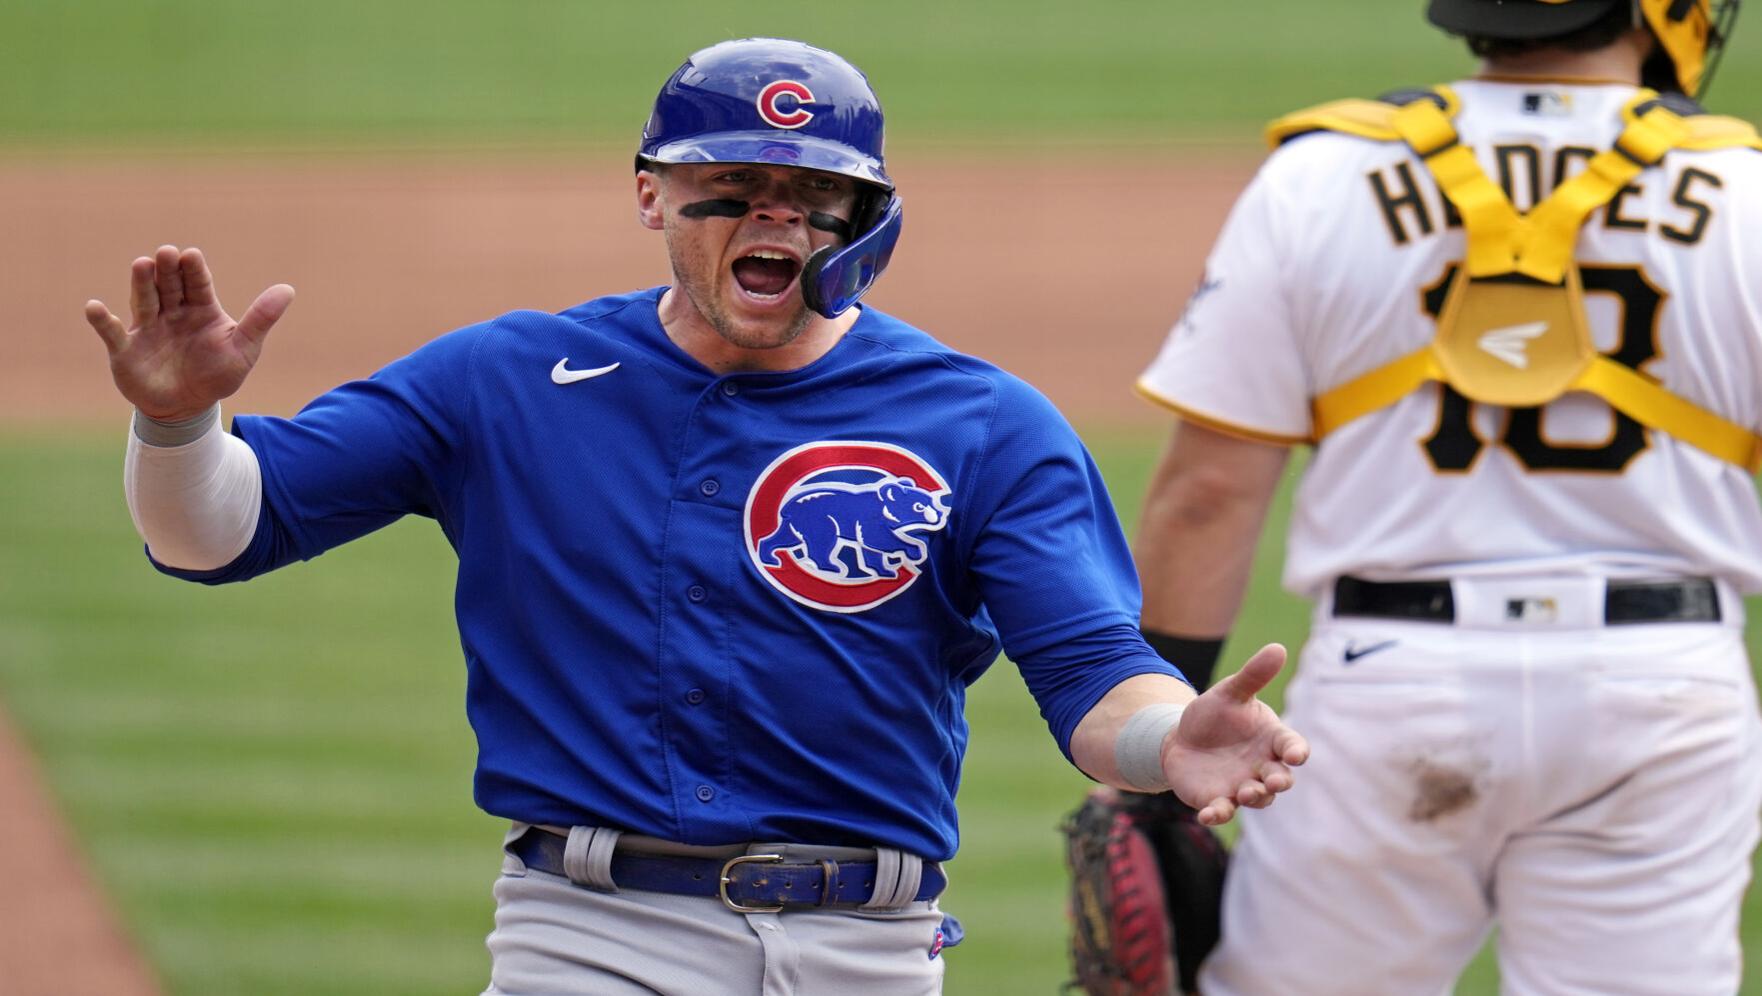 Cubs playing their best baseball in months as rookie sensations